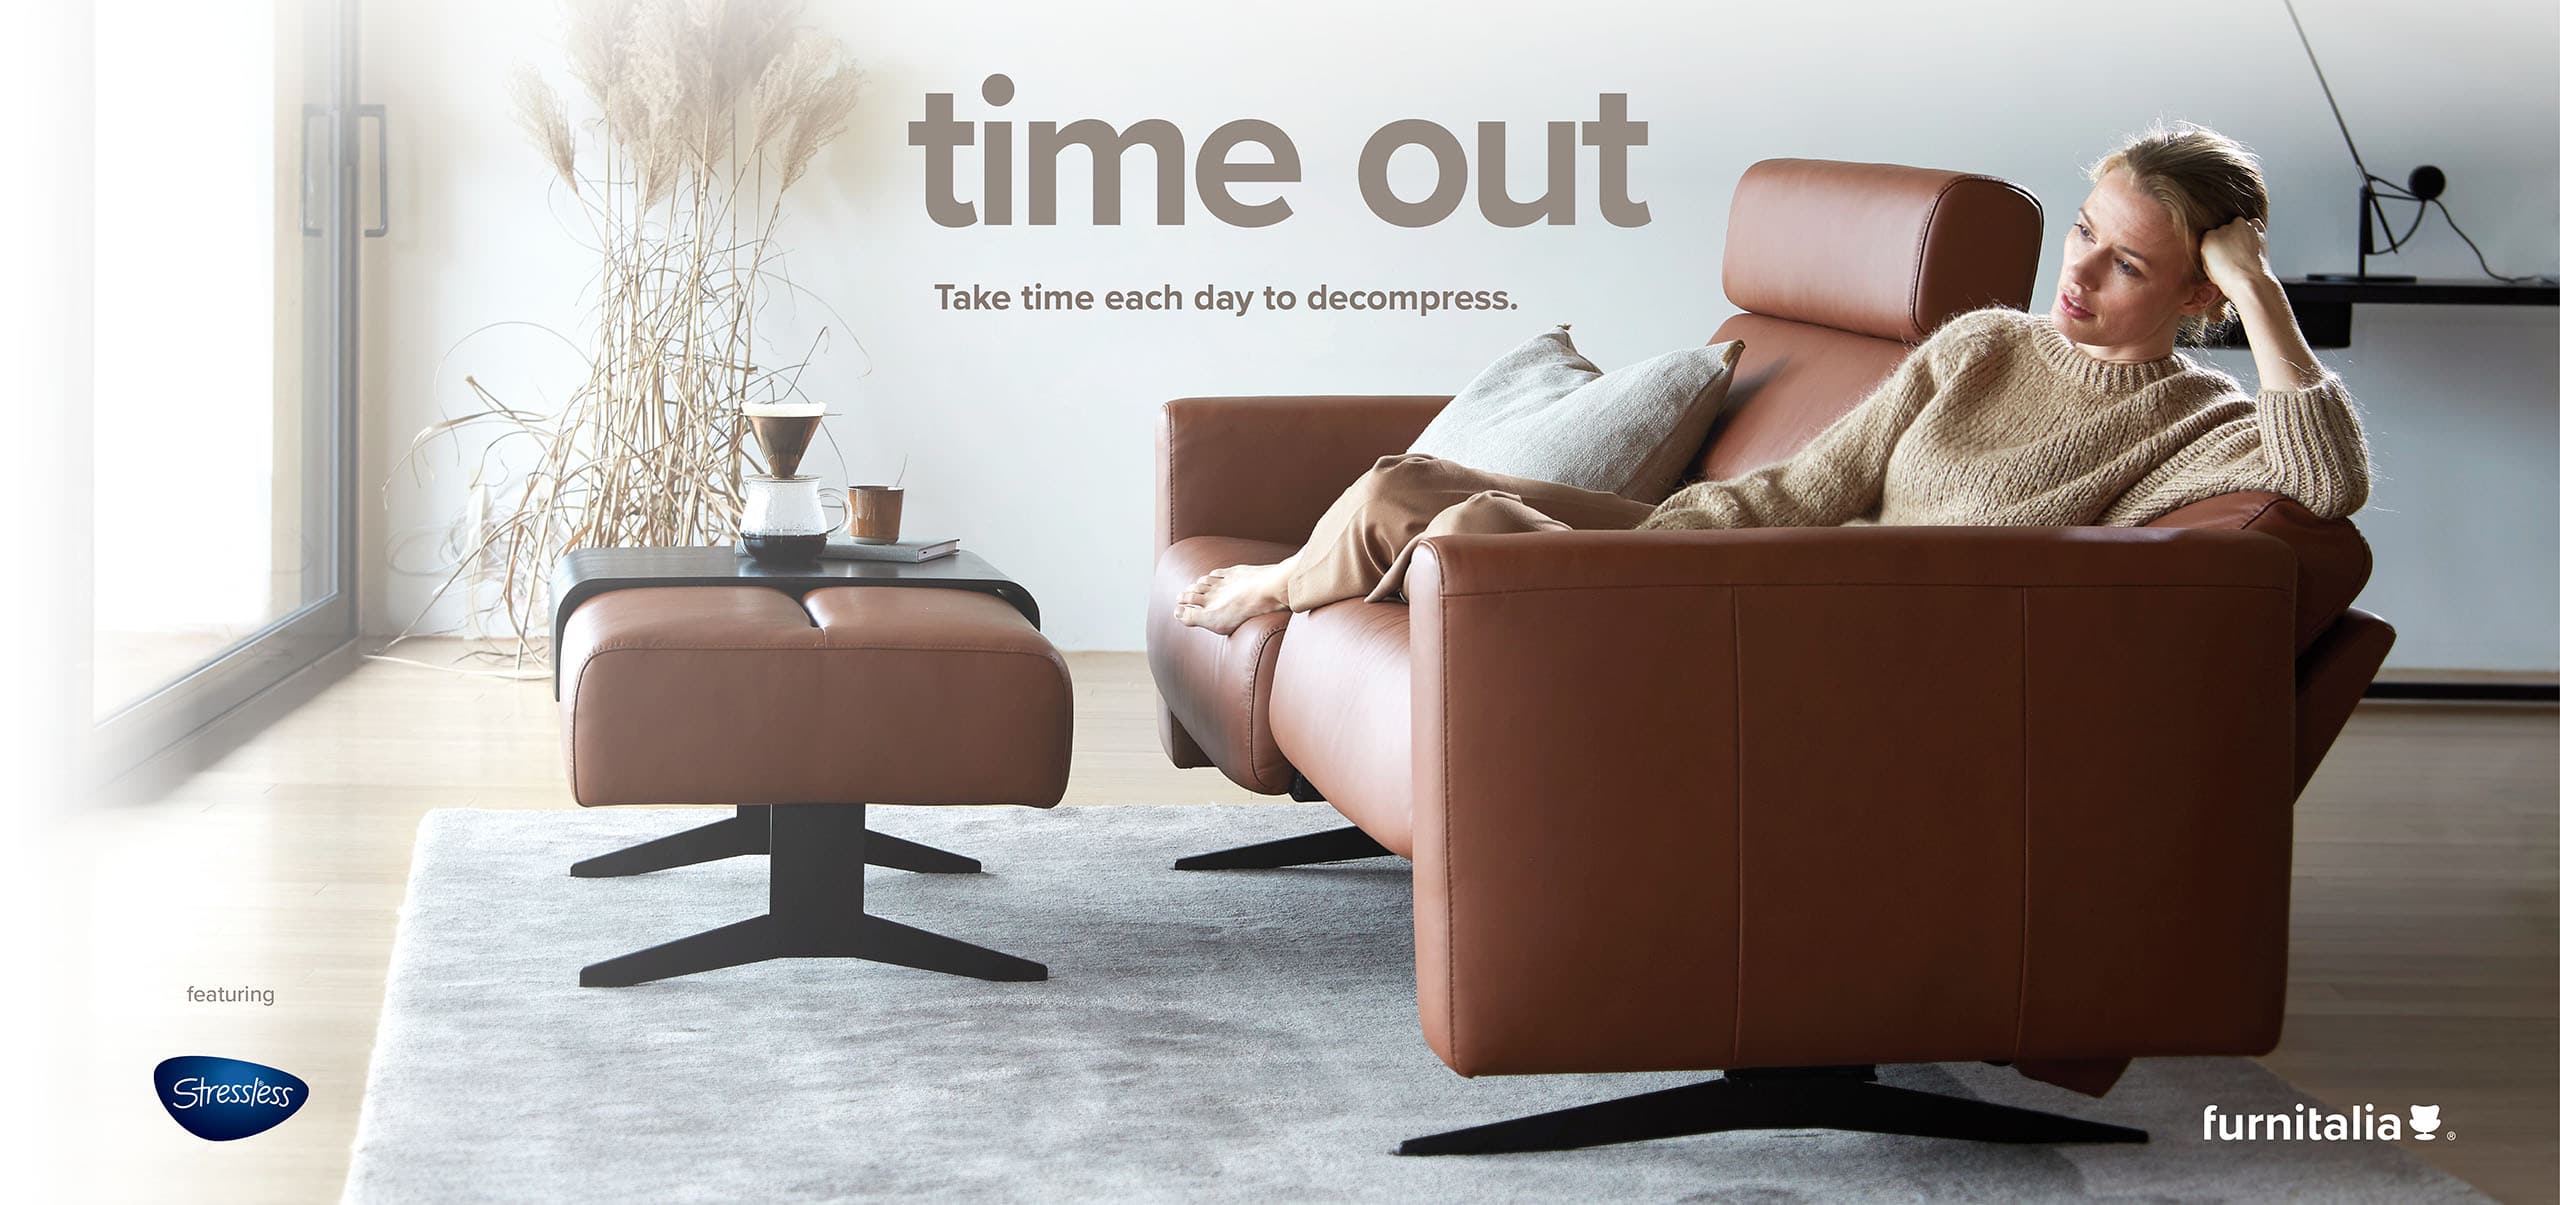 Enjoy modern contemporary home furniture like this sofa and ottoman from Stressless®.